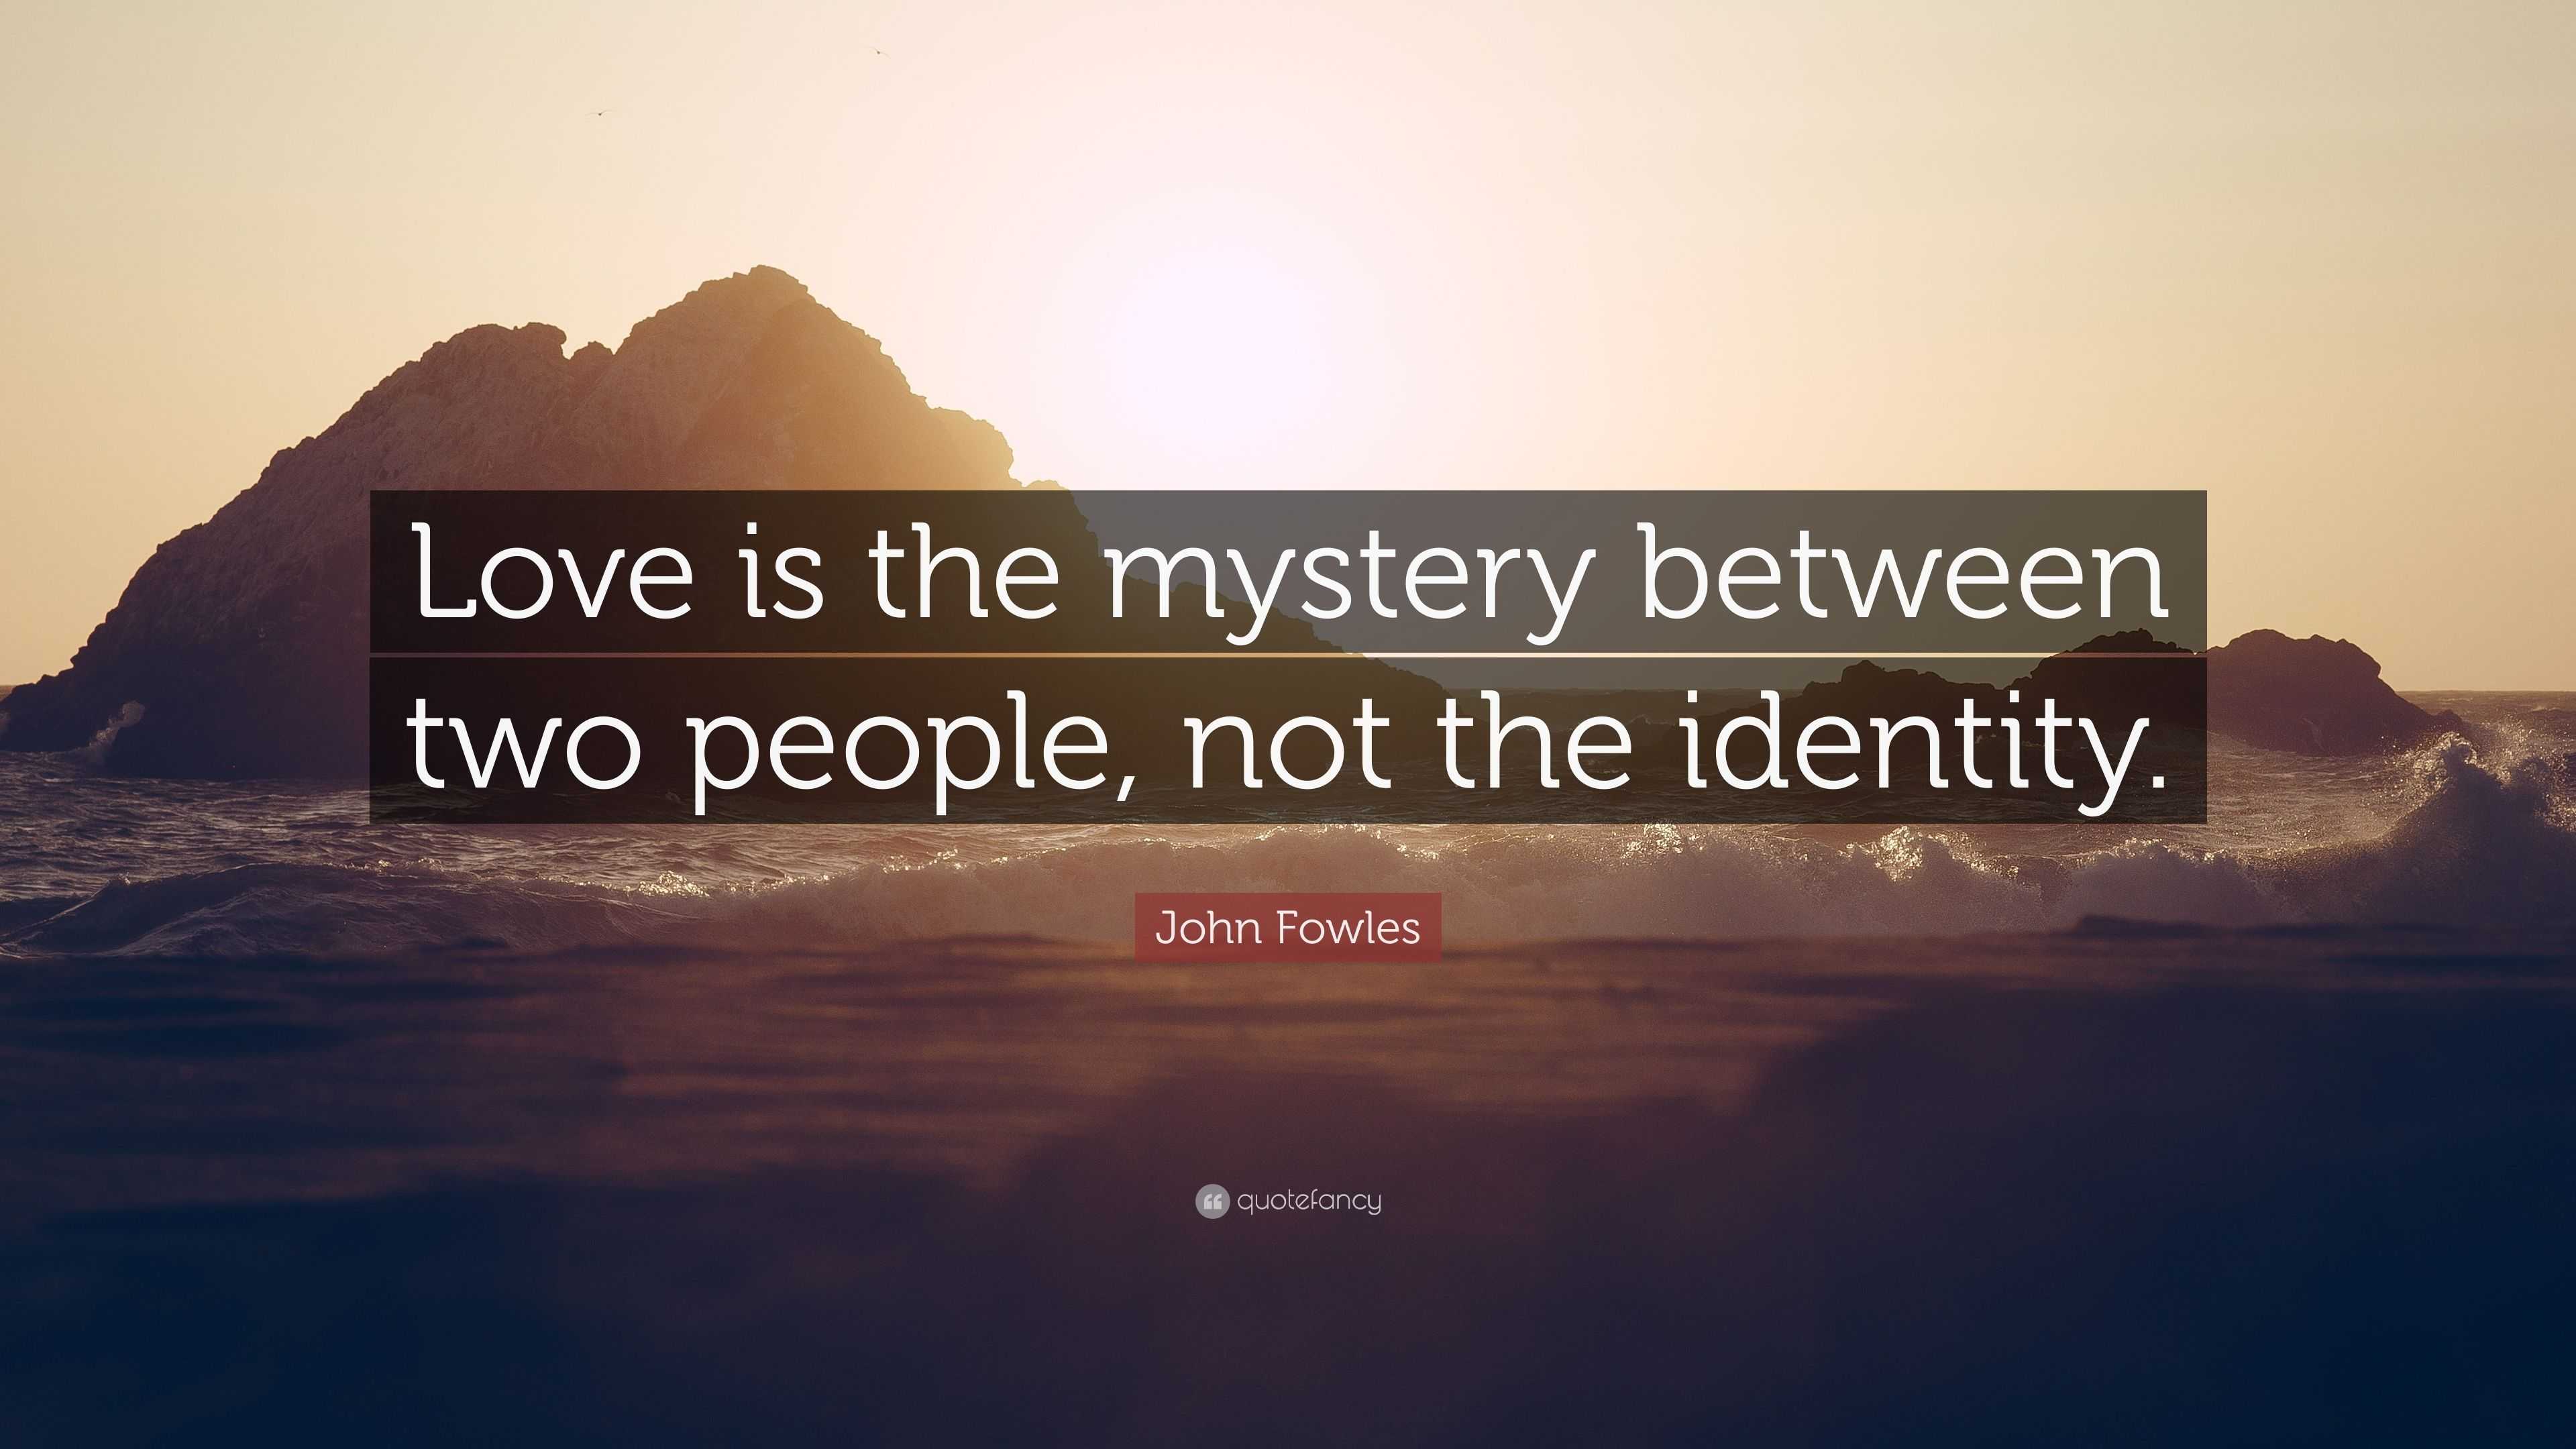 John Fowles Quote: “Love is the mystery between two people, not the ...